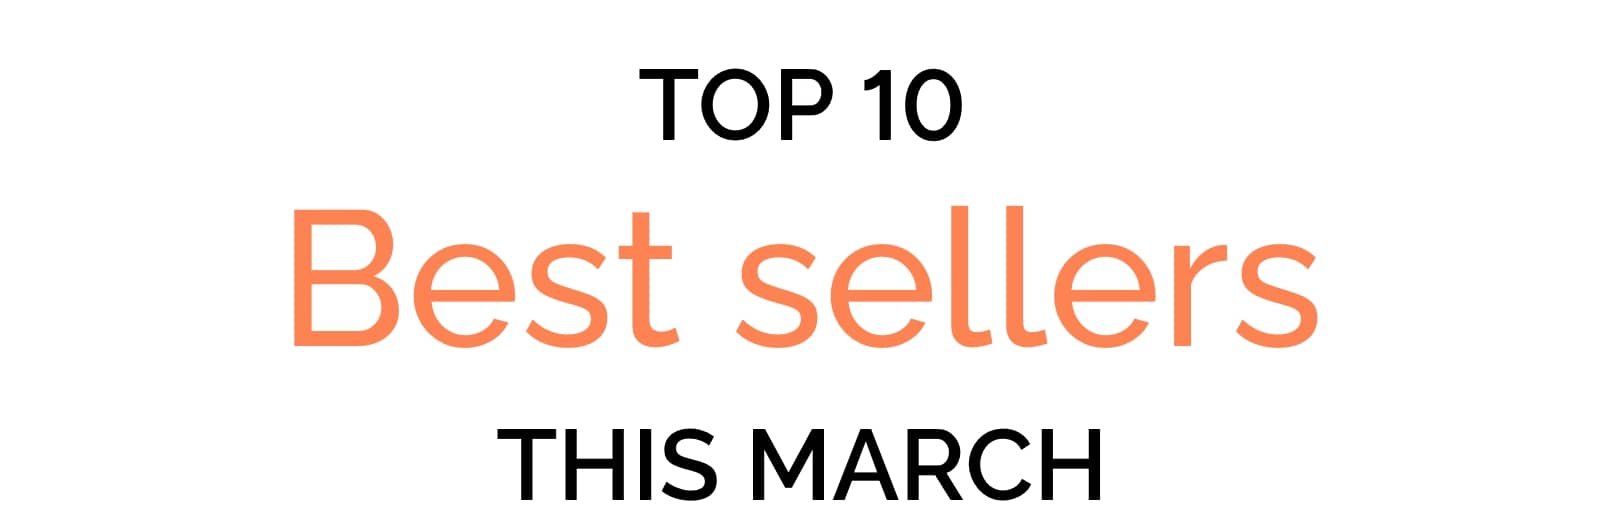 Top 10 best sellers this March